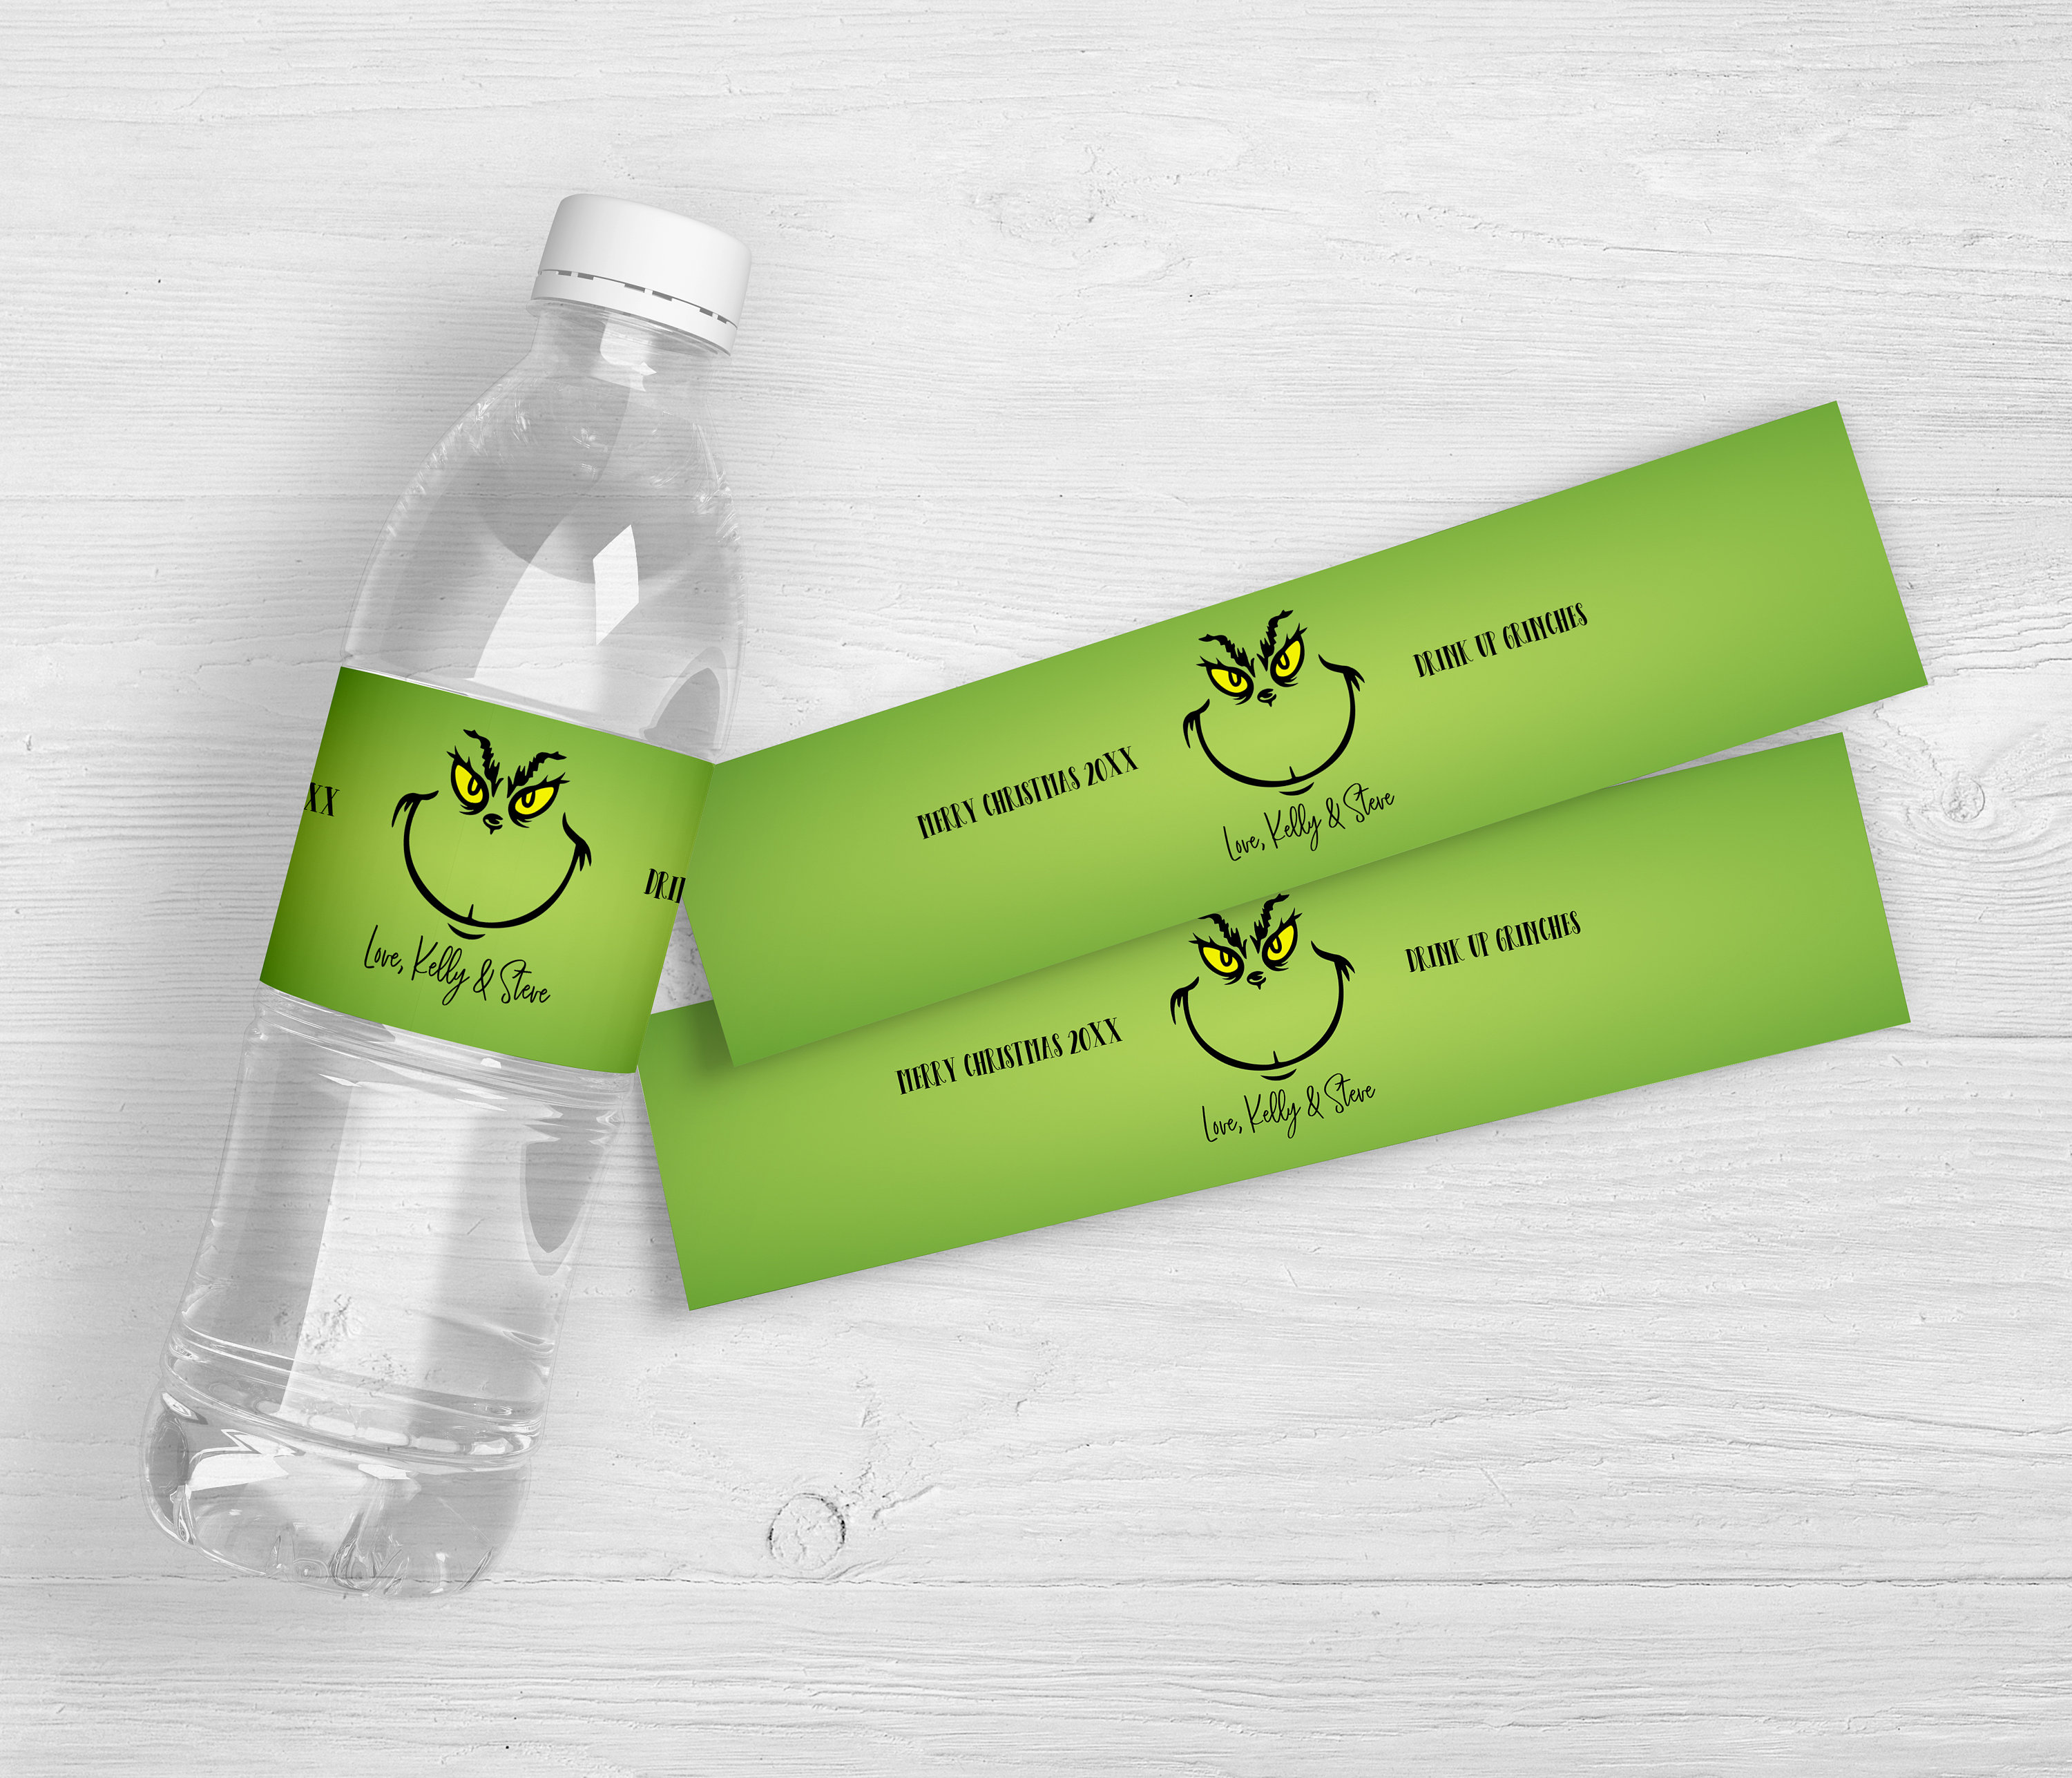 Festive Grinch-themed water bottle labels to spread holiday cheer!